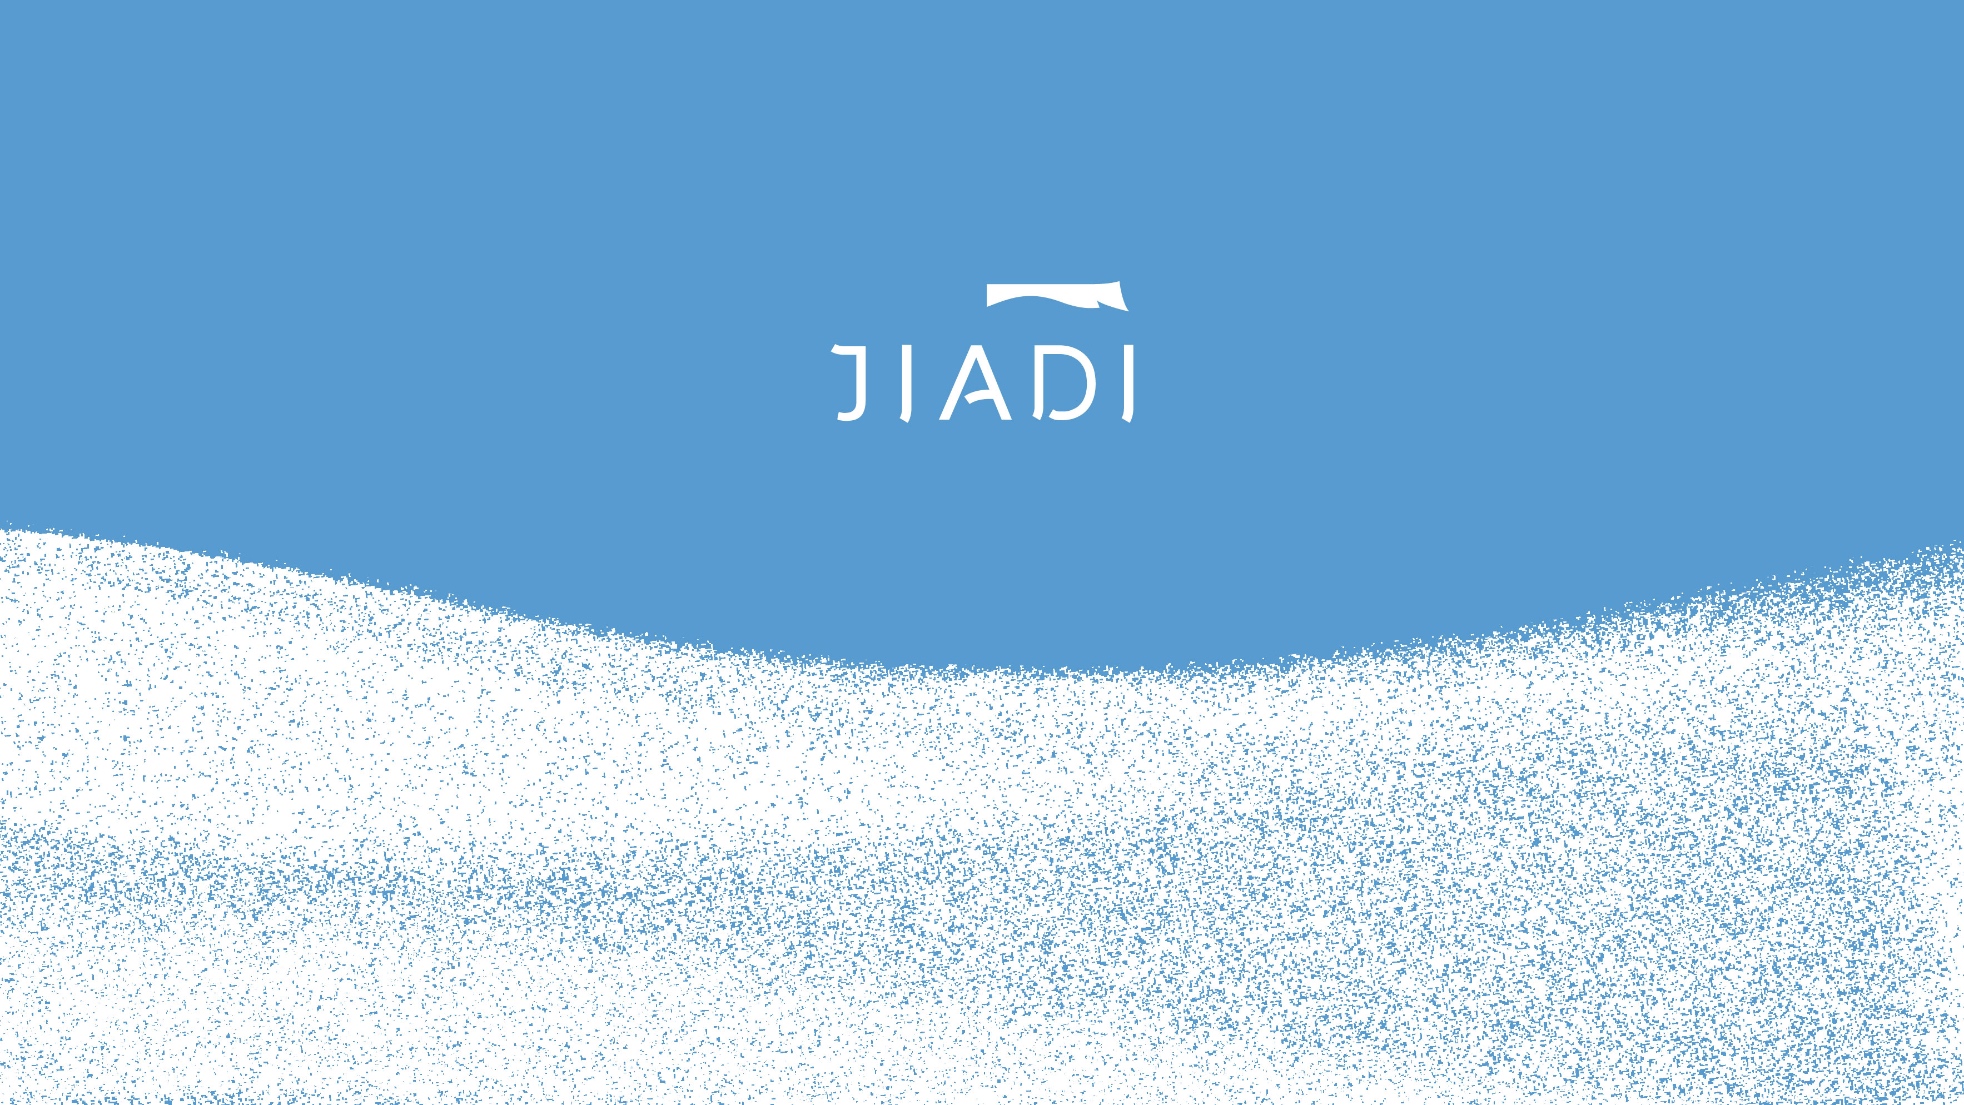 Student Brand Identity Concept for Jiadi Perfume